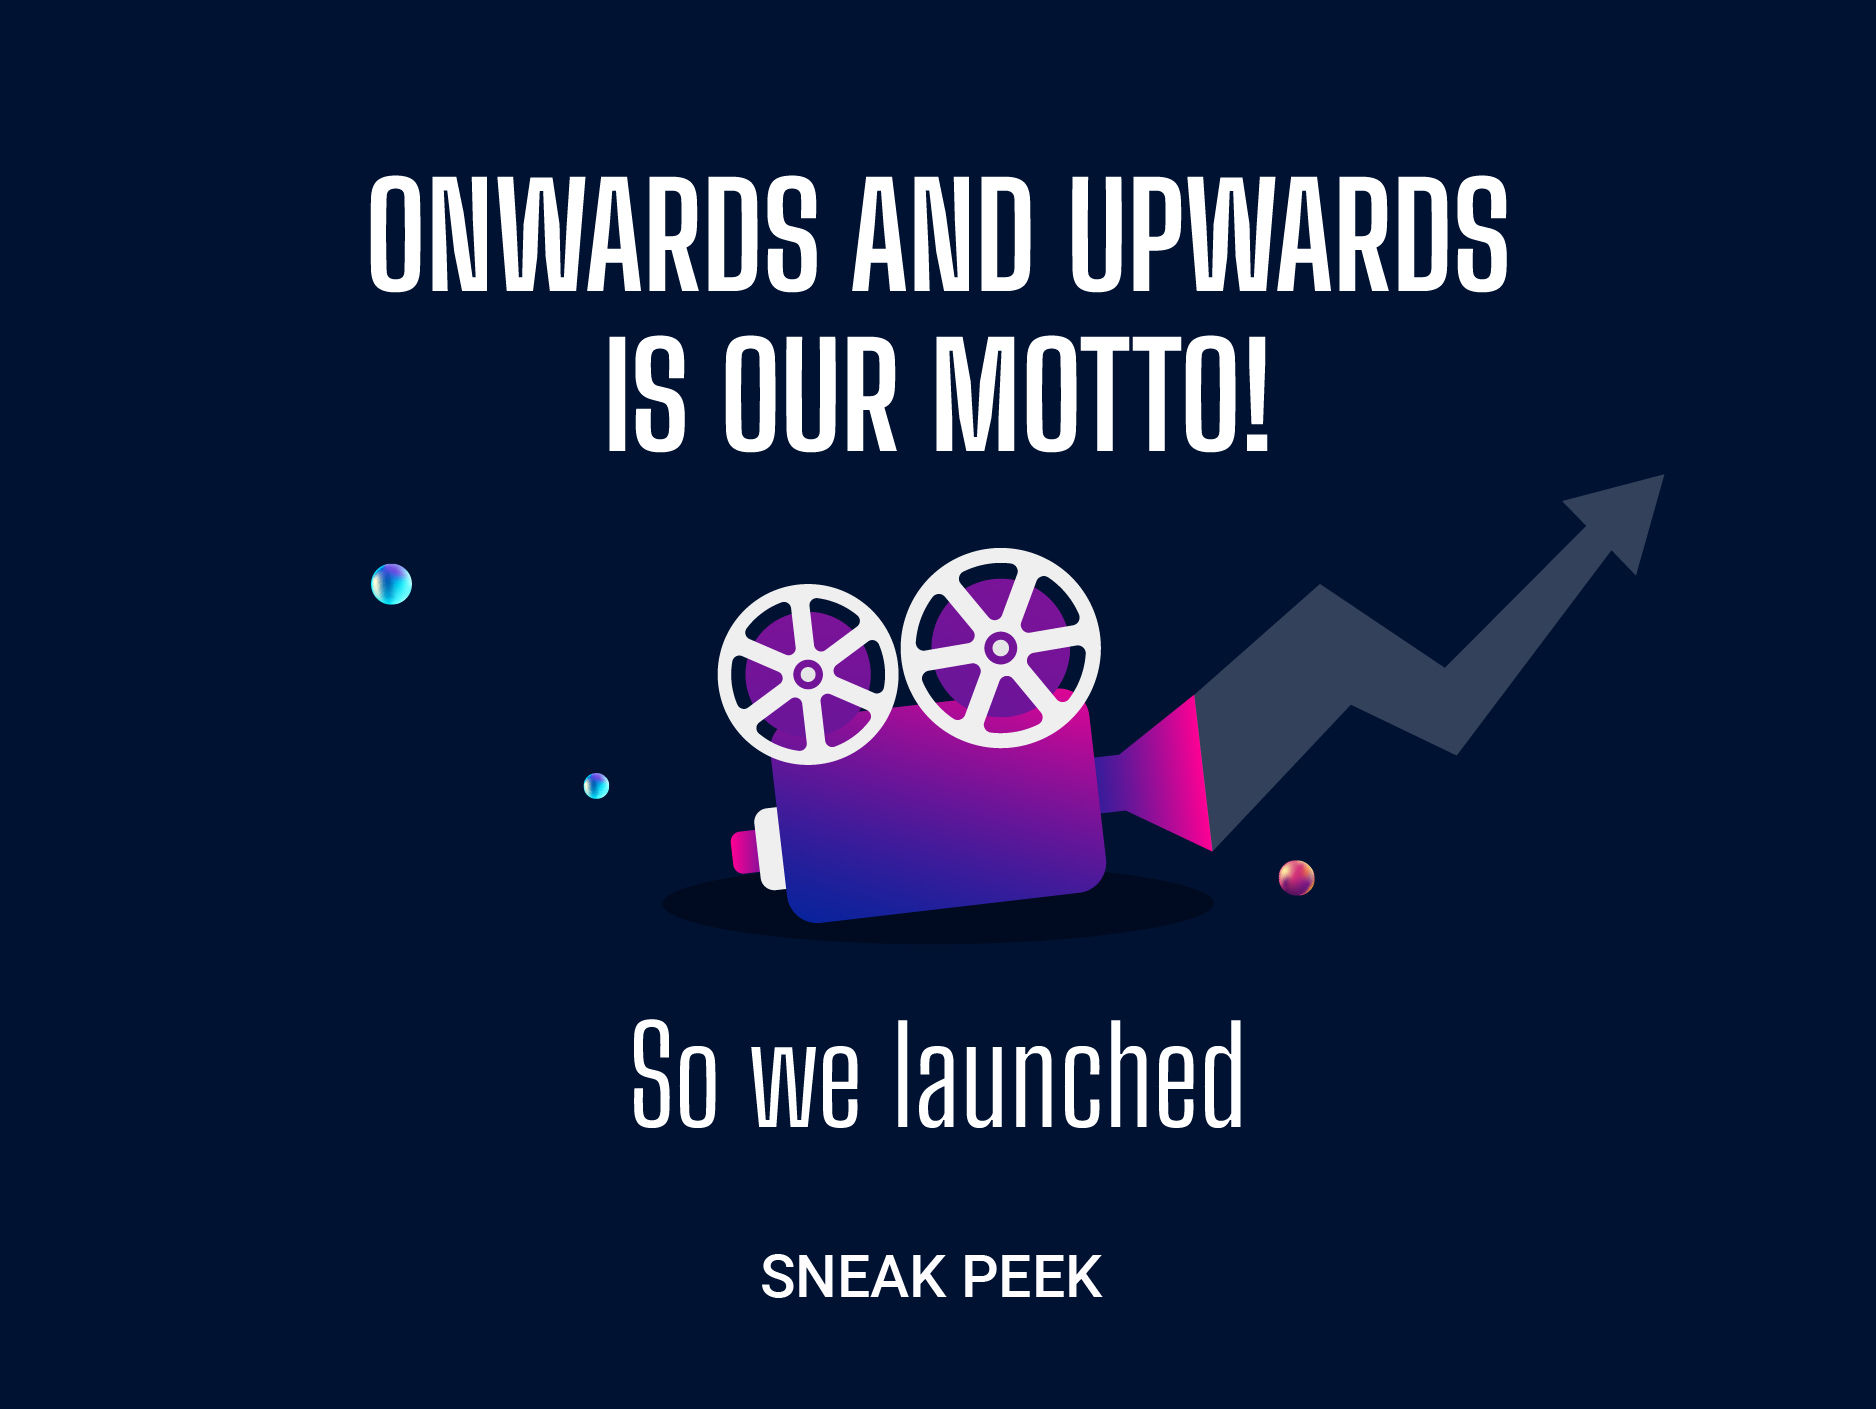 Onwards and upwards is our motto. So we launched